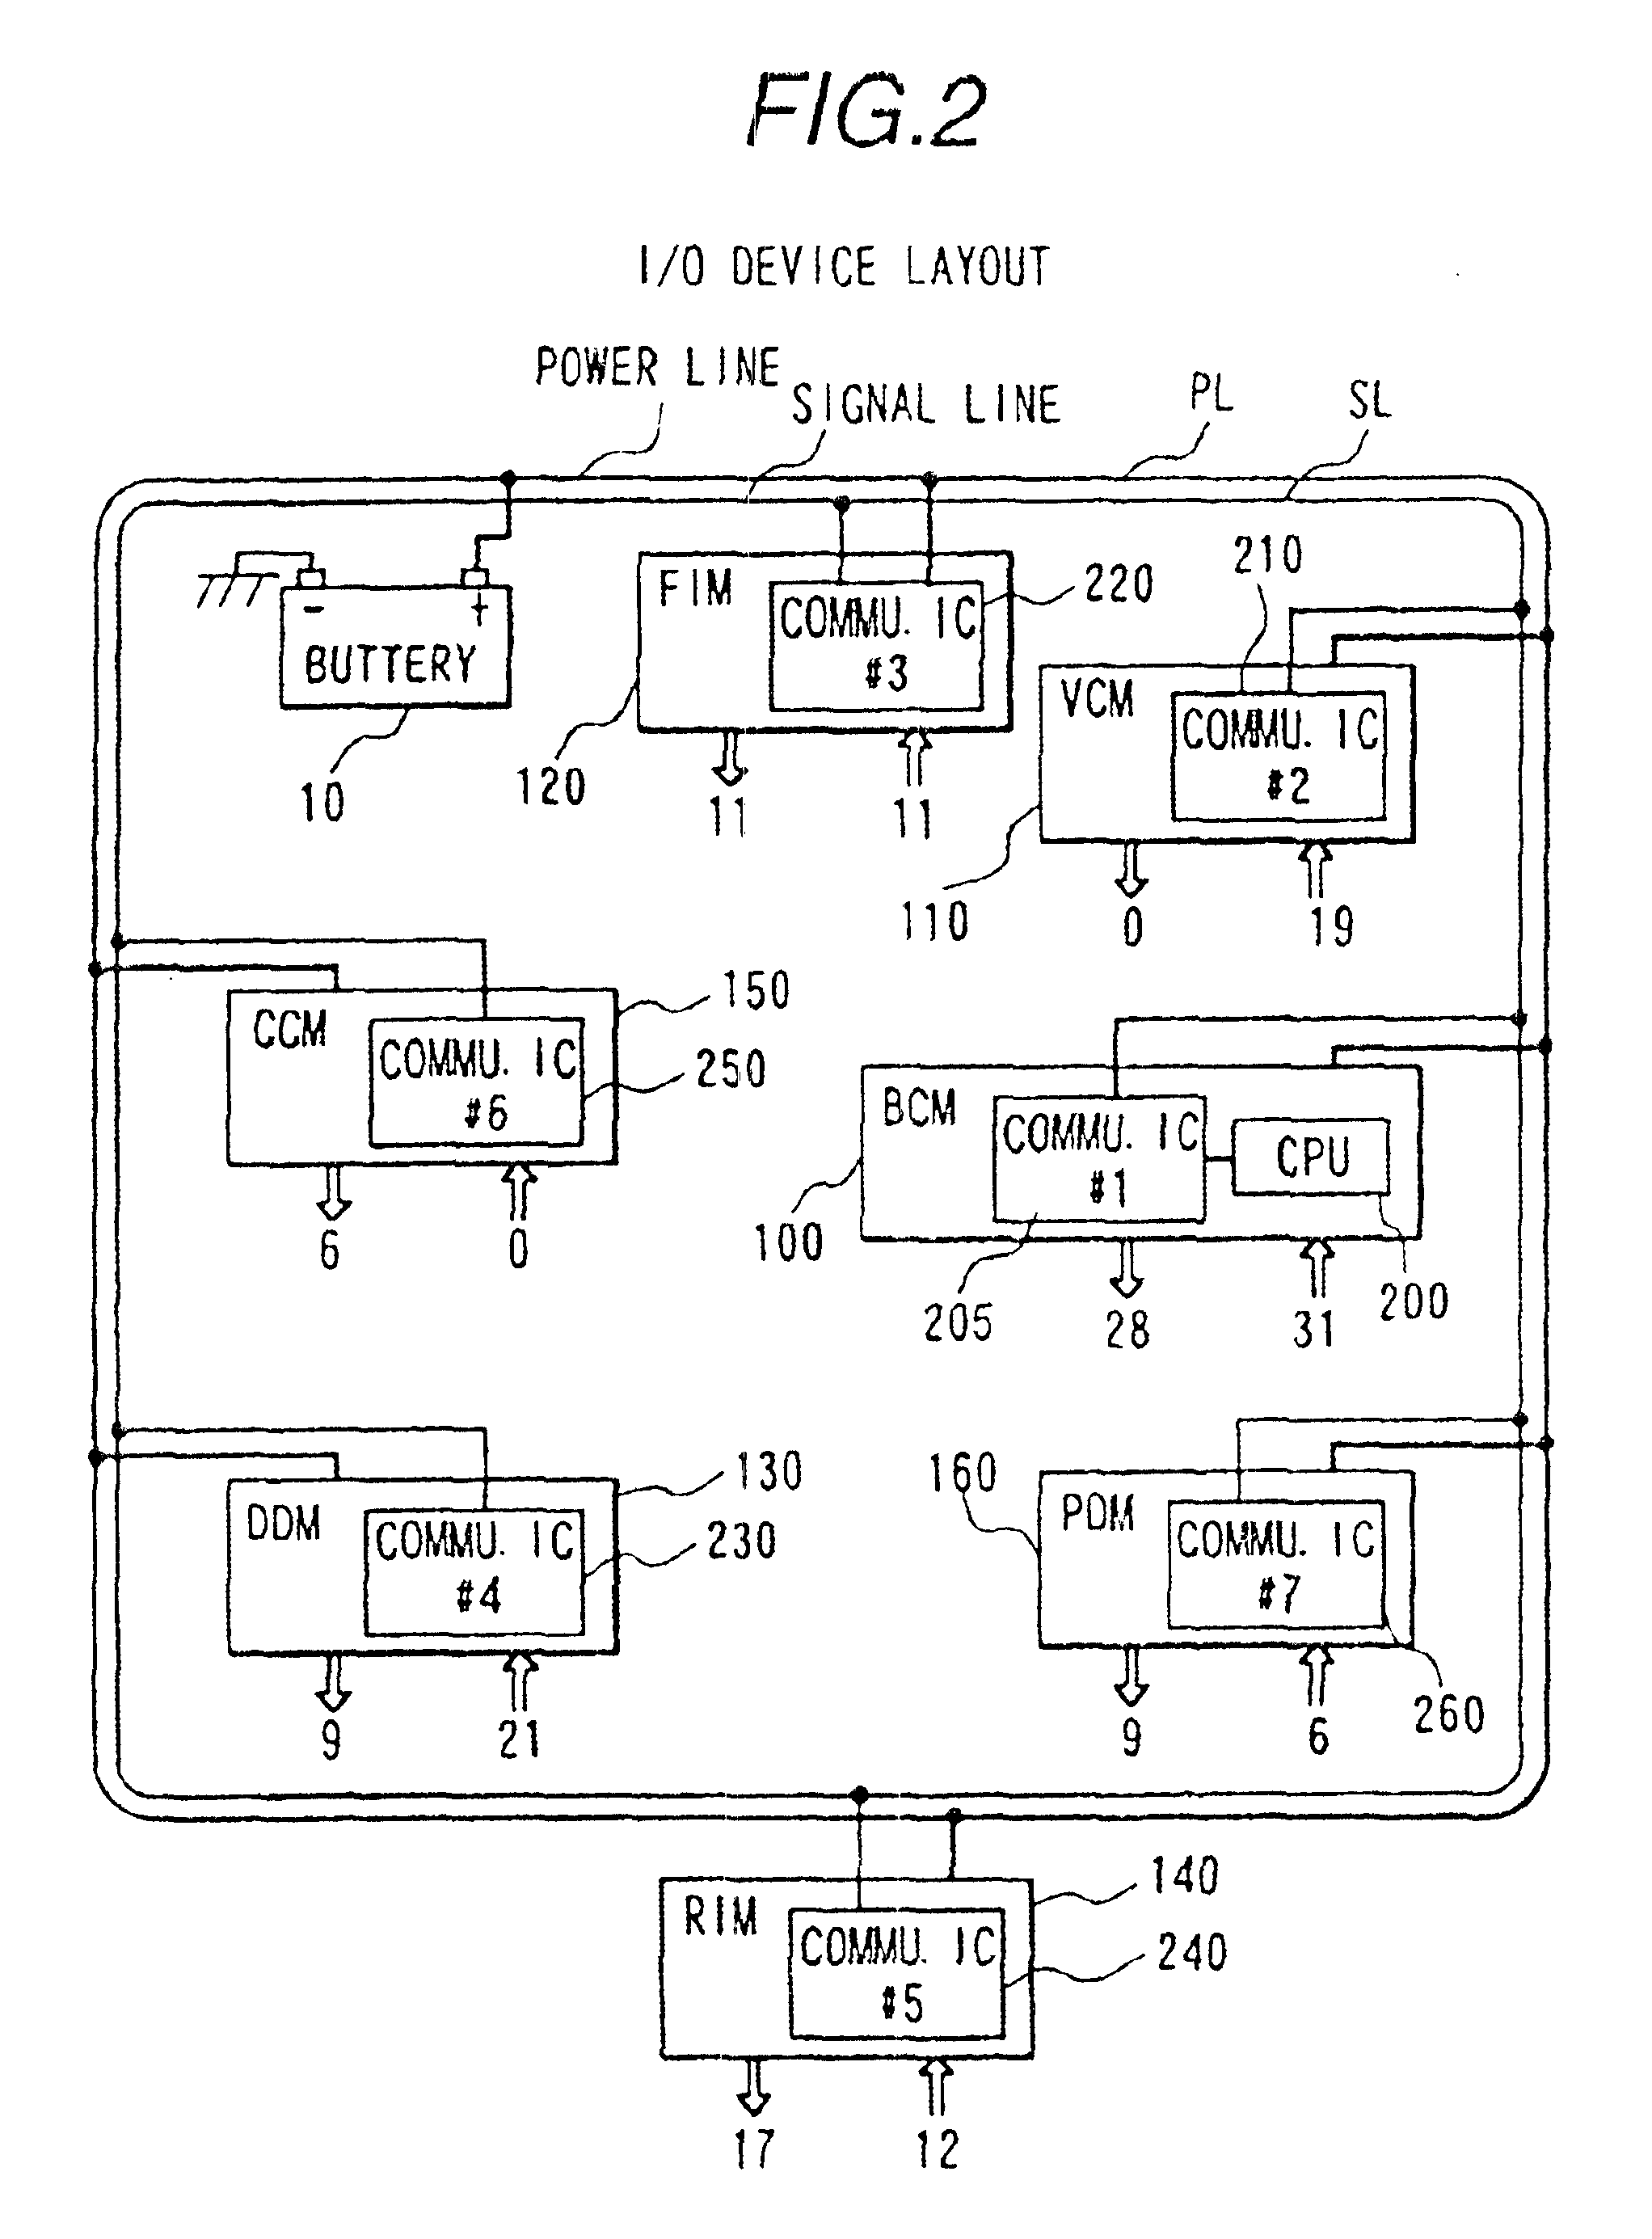 Electric power supply system for a vehicle